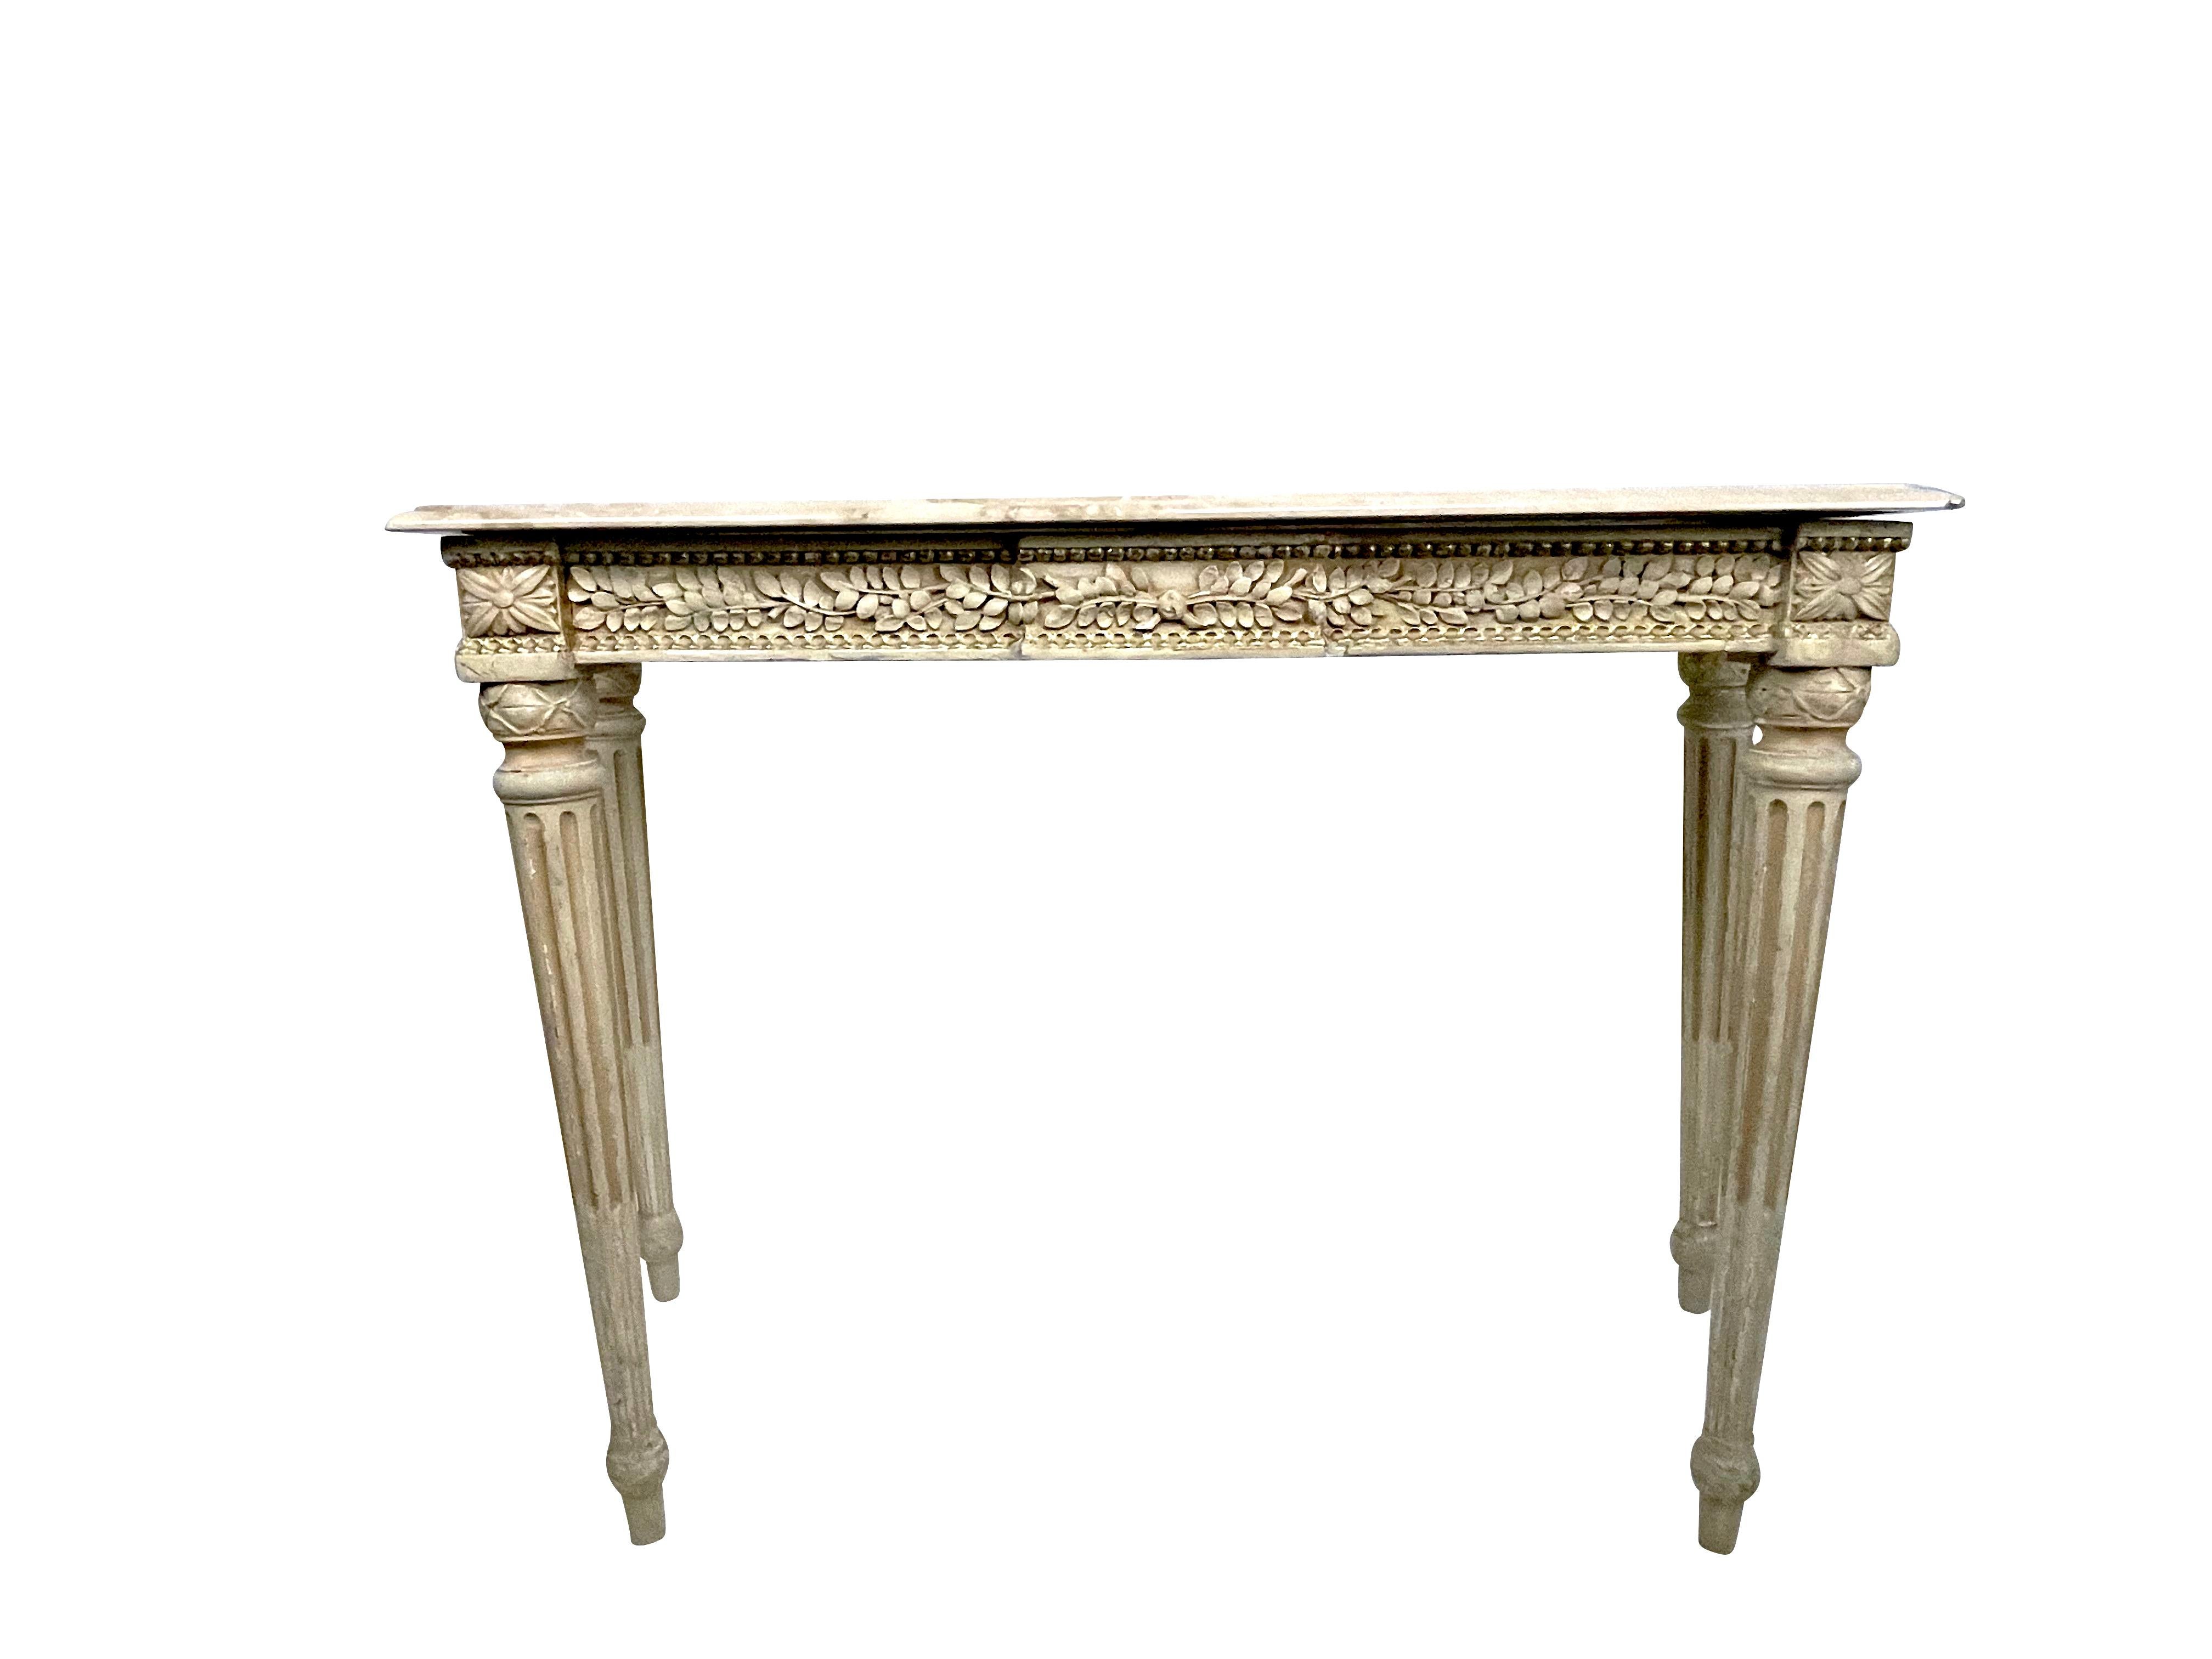 French Louis XVI Maison Jansen beige and gold gilt painted console table intricately carved with foliate detail and beaded edging. Original to the Waldorf Towers 1931 opening in New York City. Original metal label affixed to the back. Each with